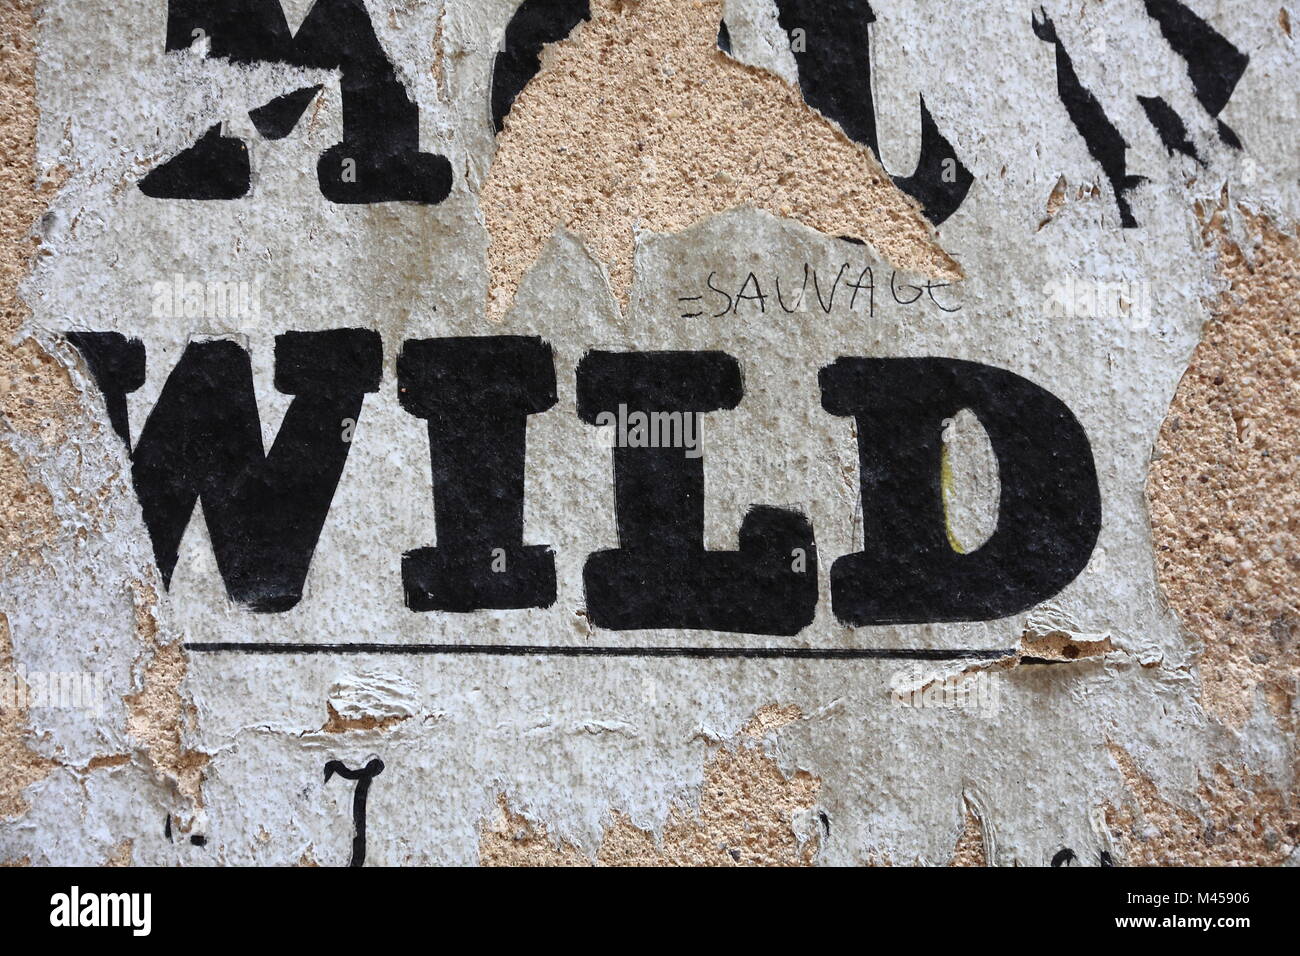 Wild meaning sauvage Stock Photo